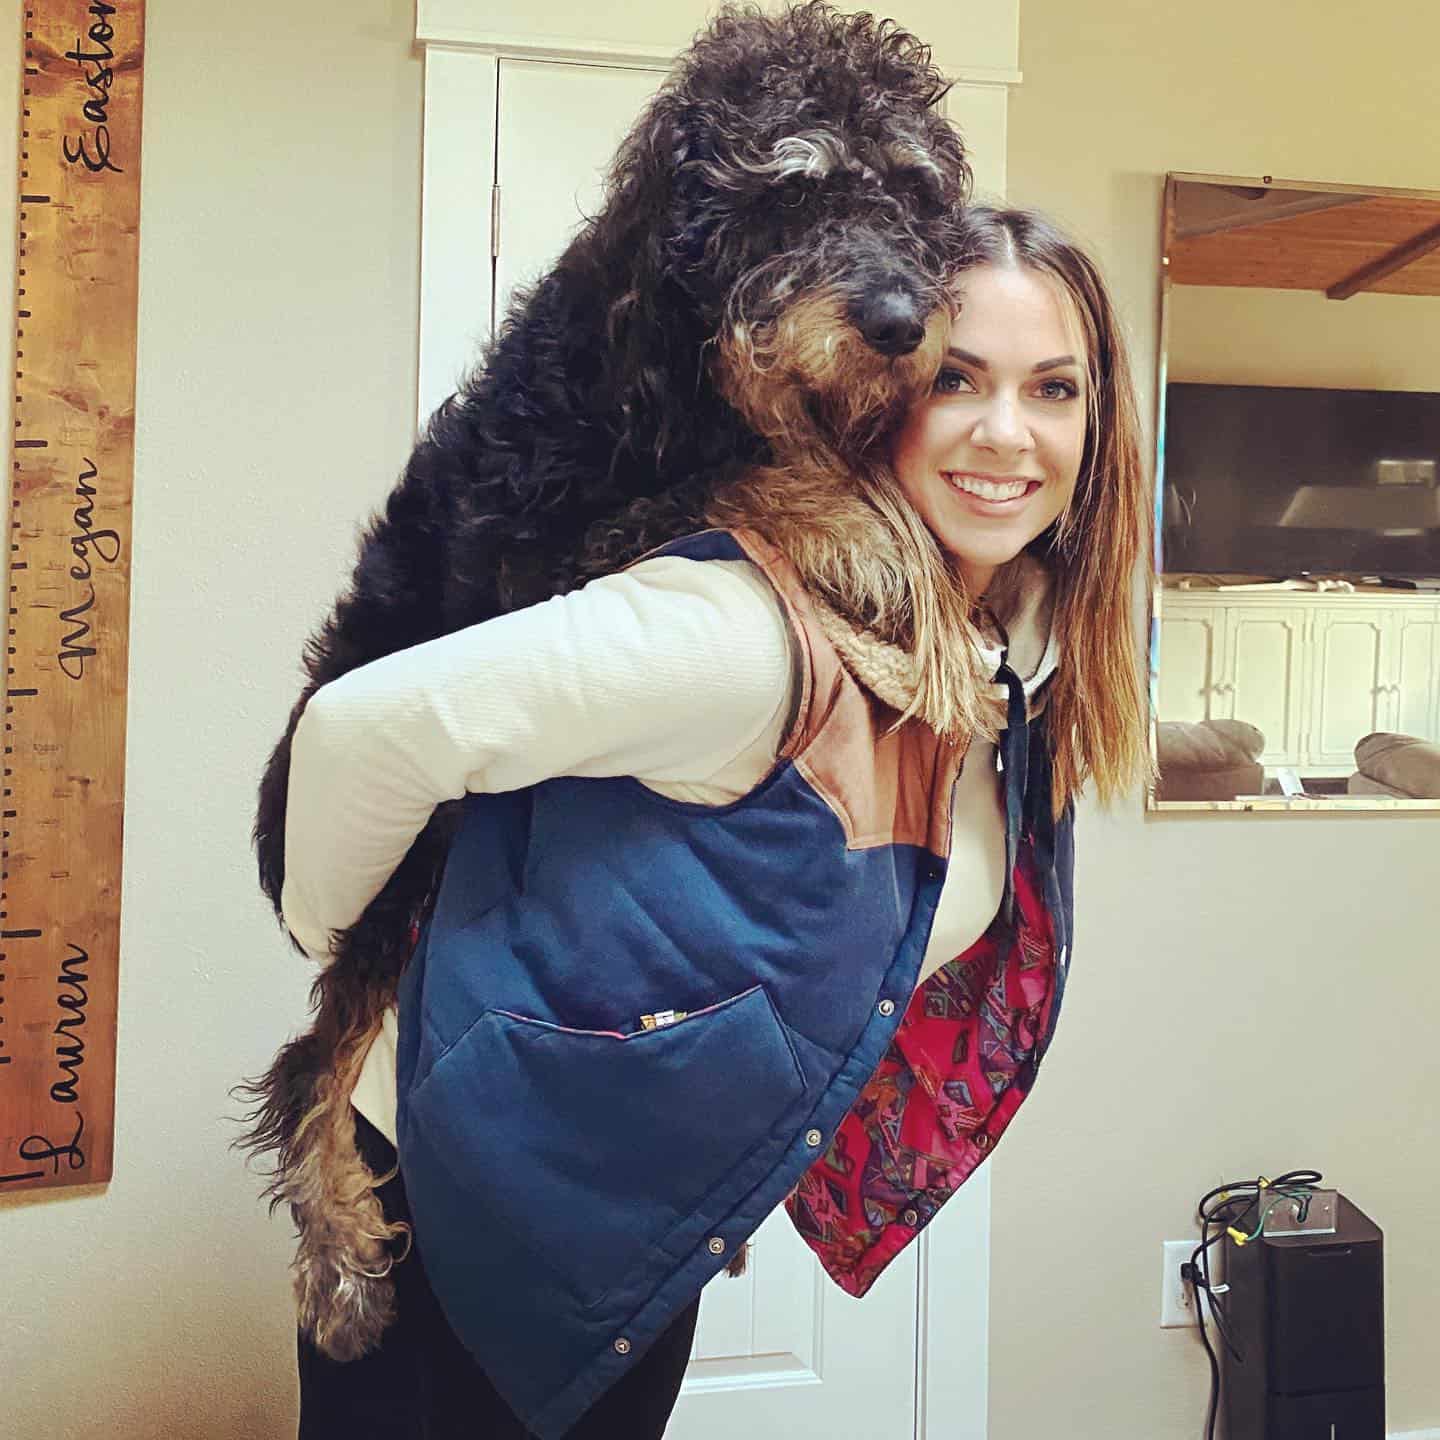 woman carrying big rottie doodle dog on her back